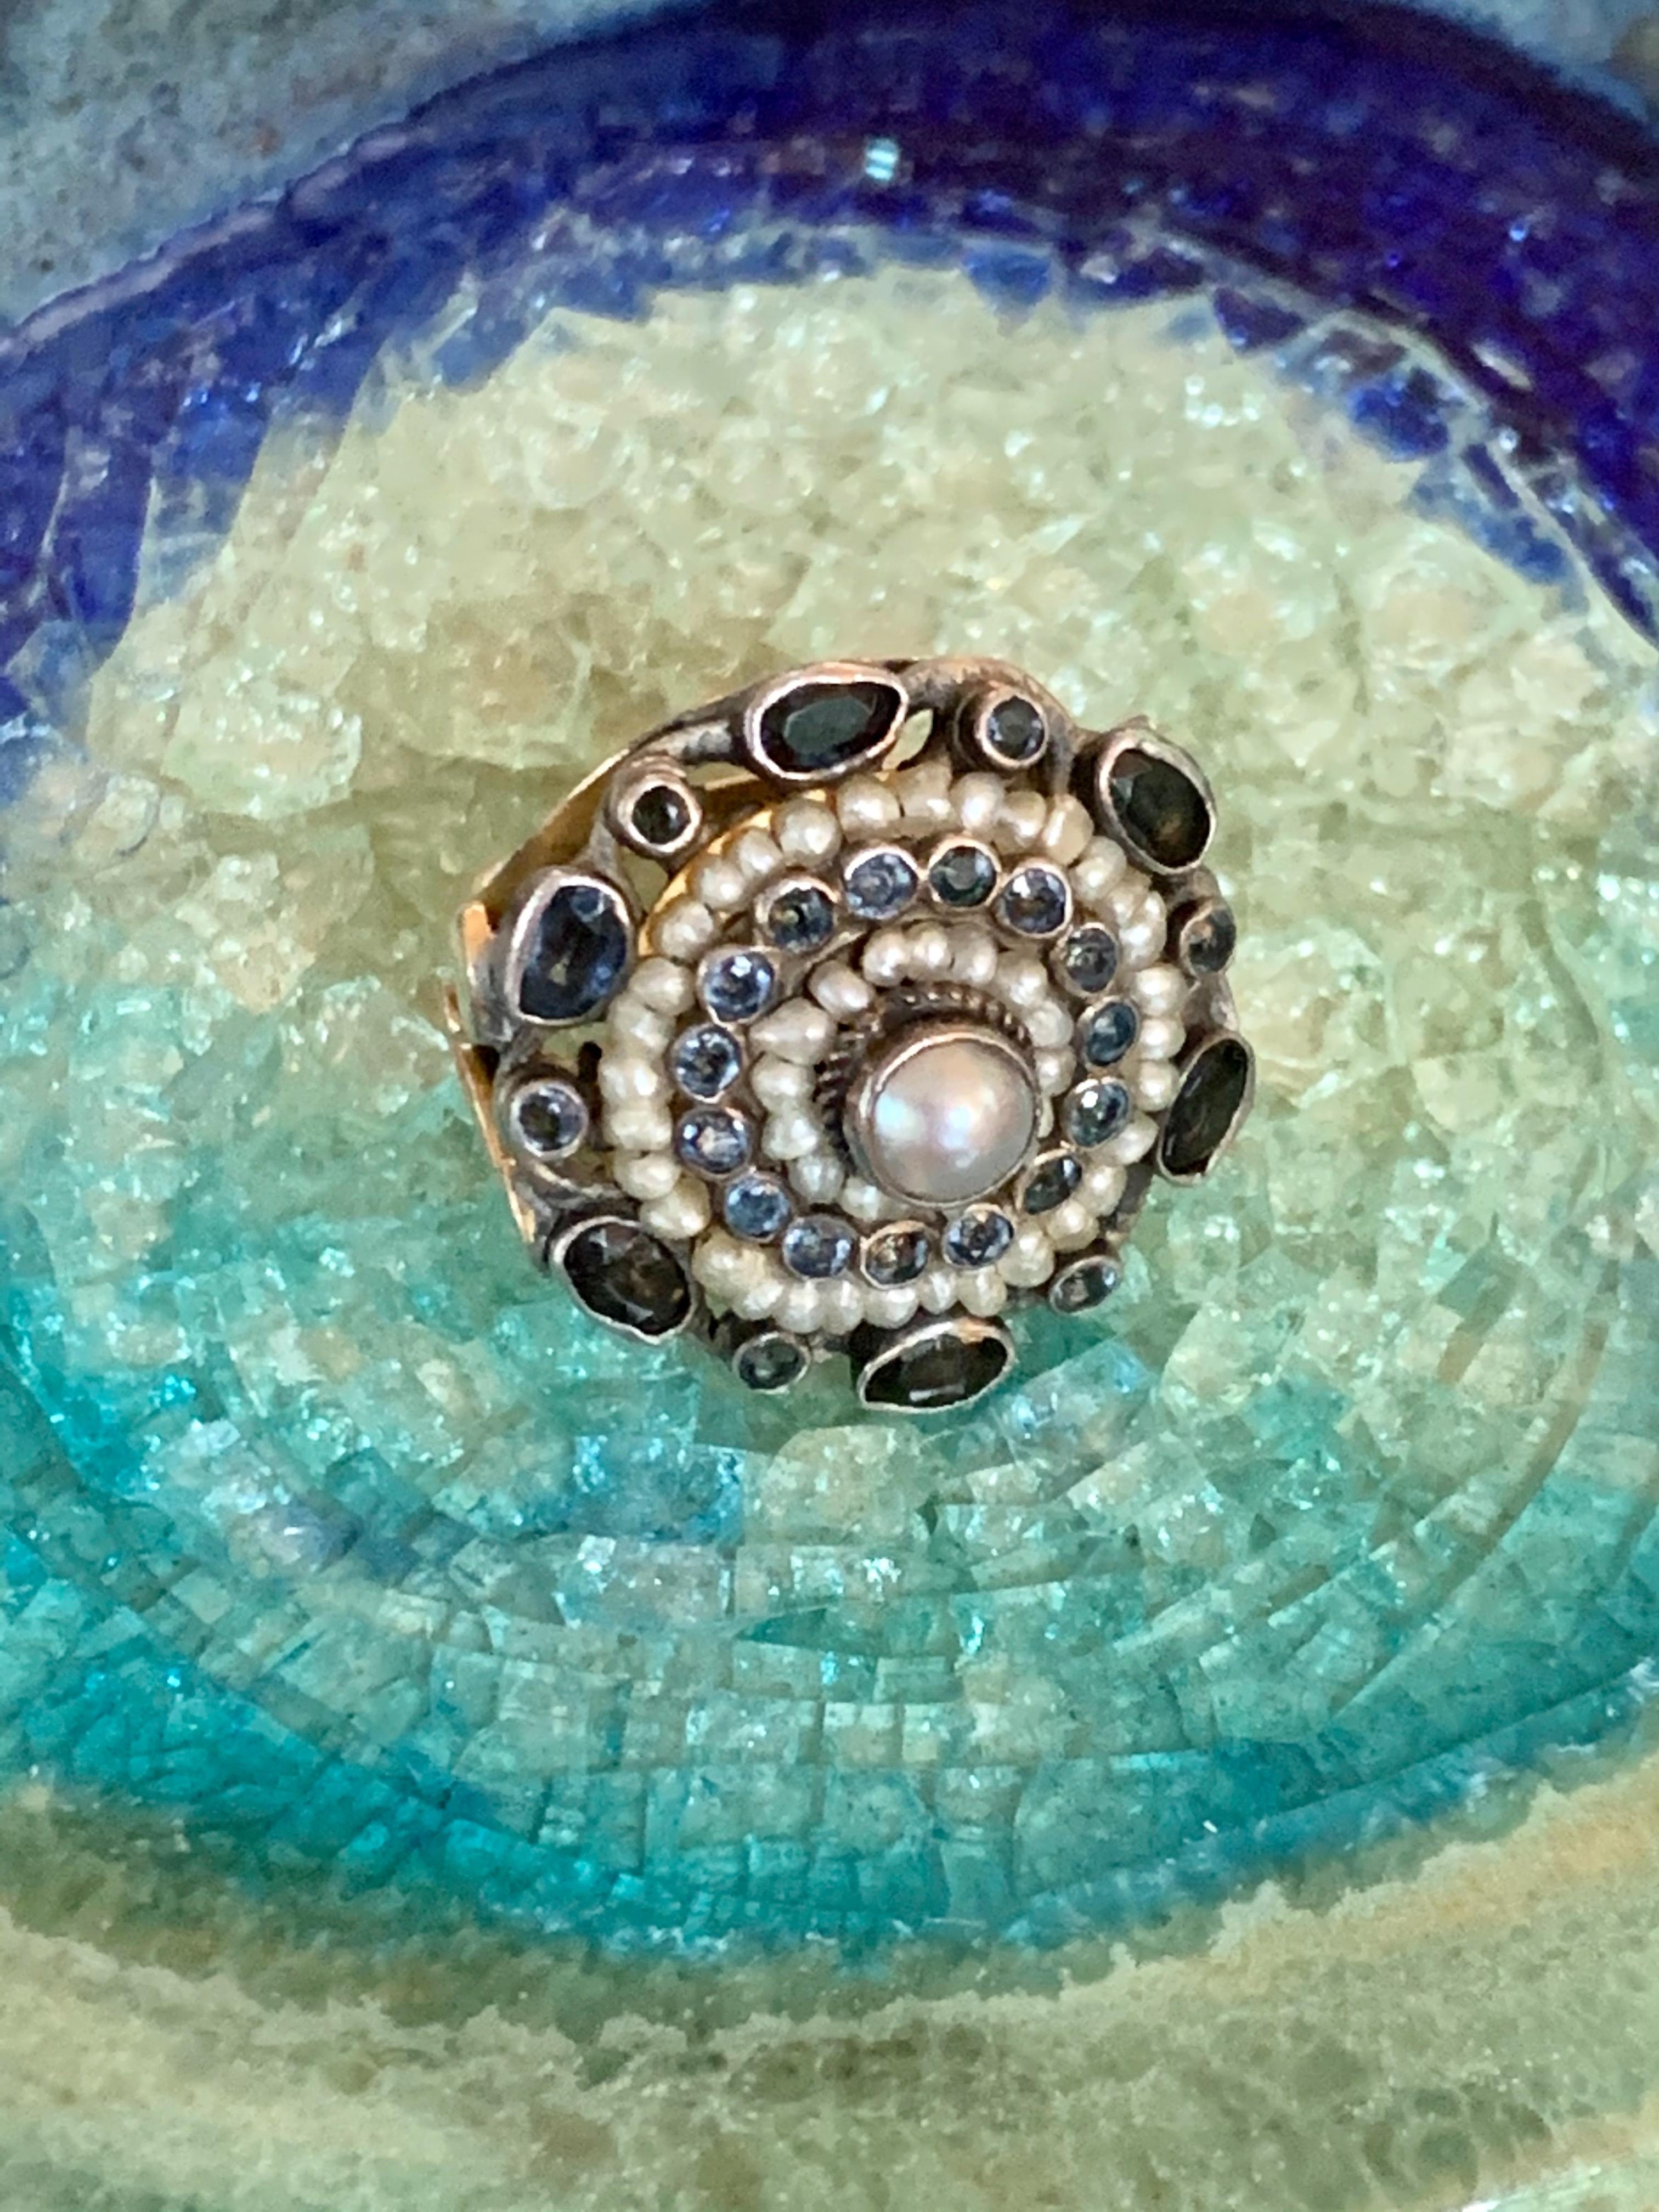 This beautiful Austro-Hungarian ring features Sapphires, Seed Pearls and blue glass clustered together in a circle which measures approximately 7/8